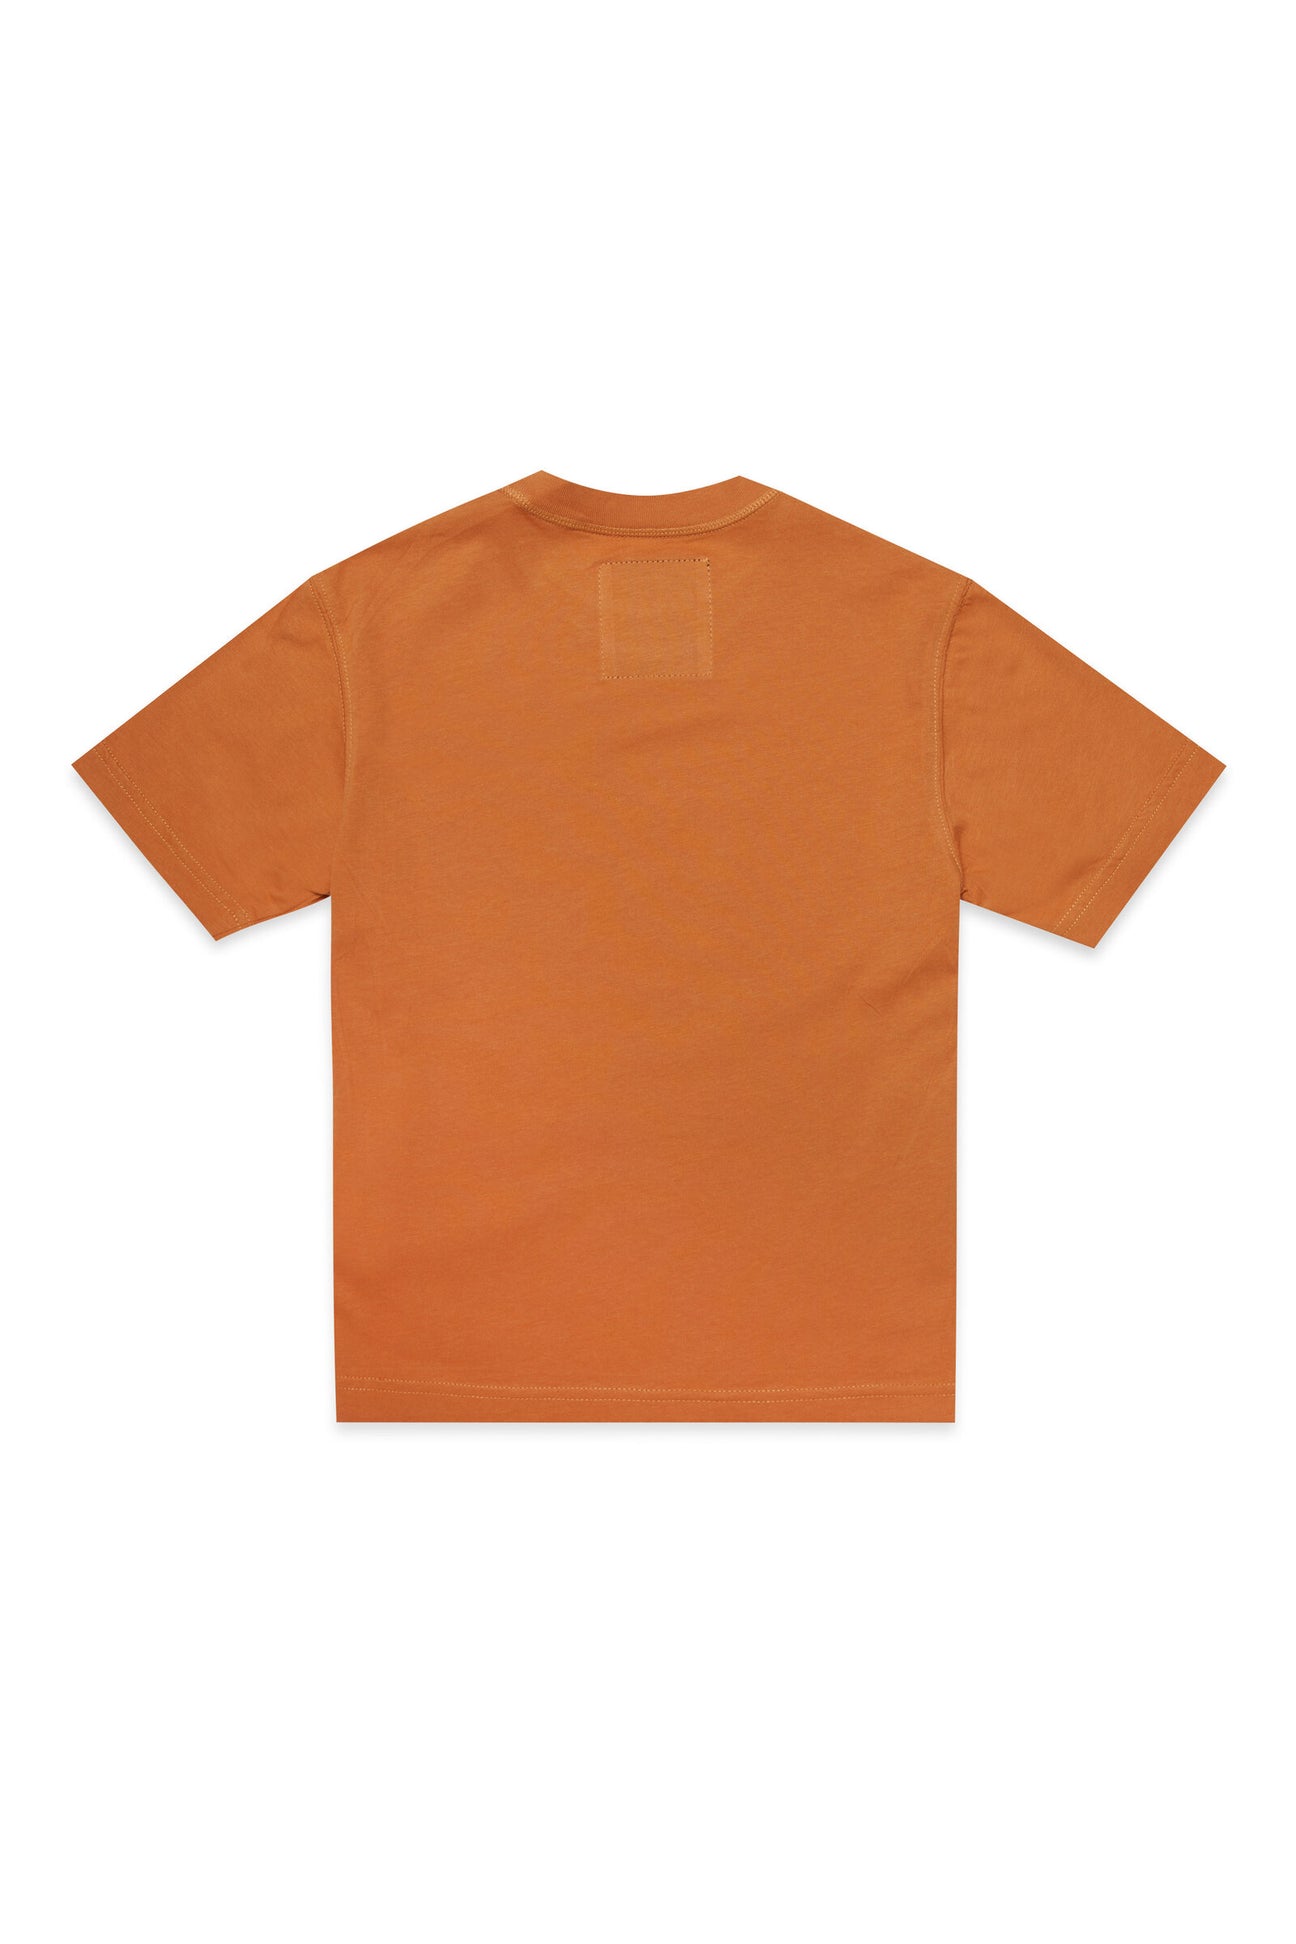 Crew-neck T-shirt in deadstock orange fabric with digital print on the front Crew-neck T-shirt in deadstock orange fabric with digital print on the front